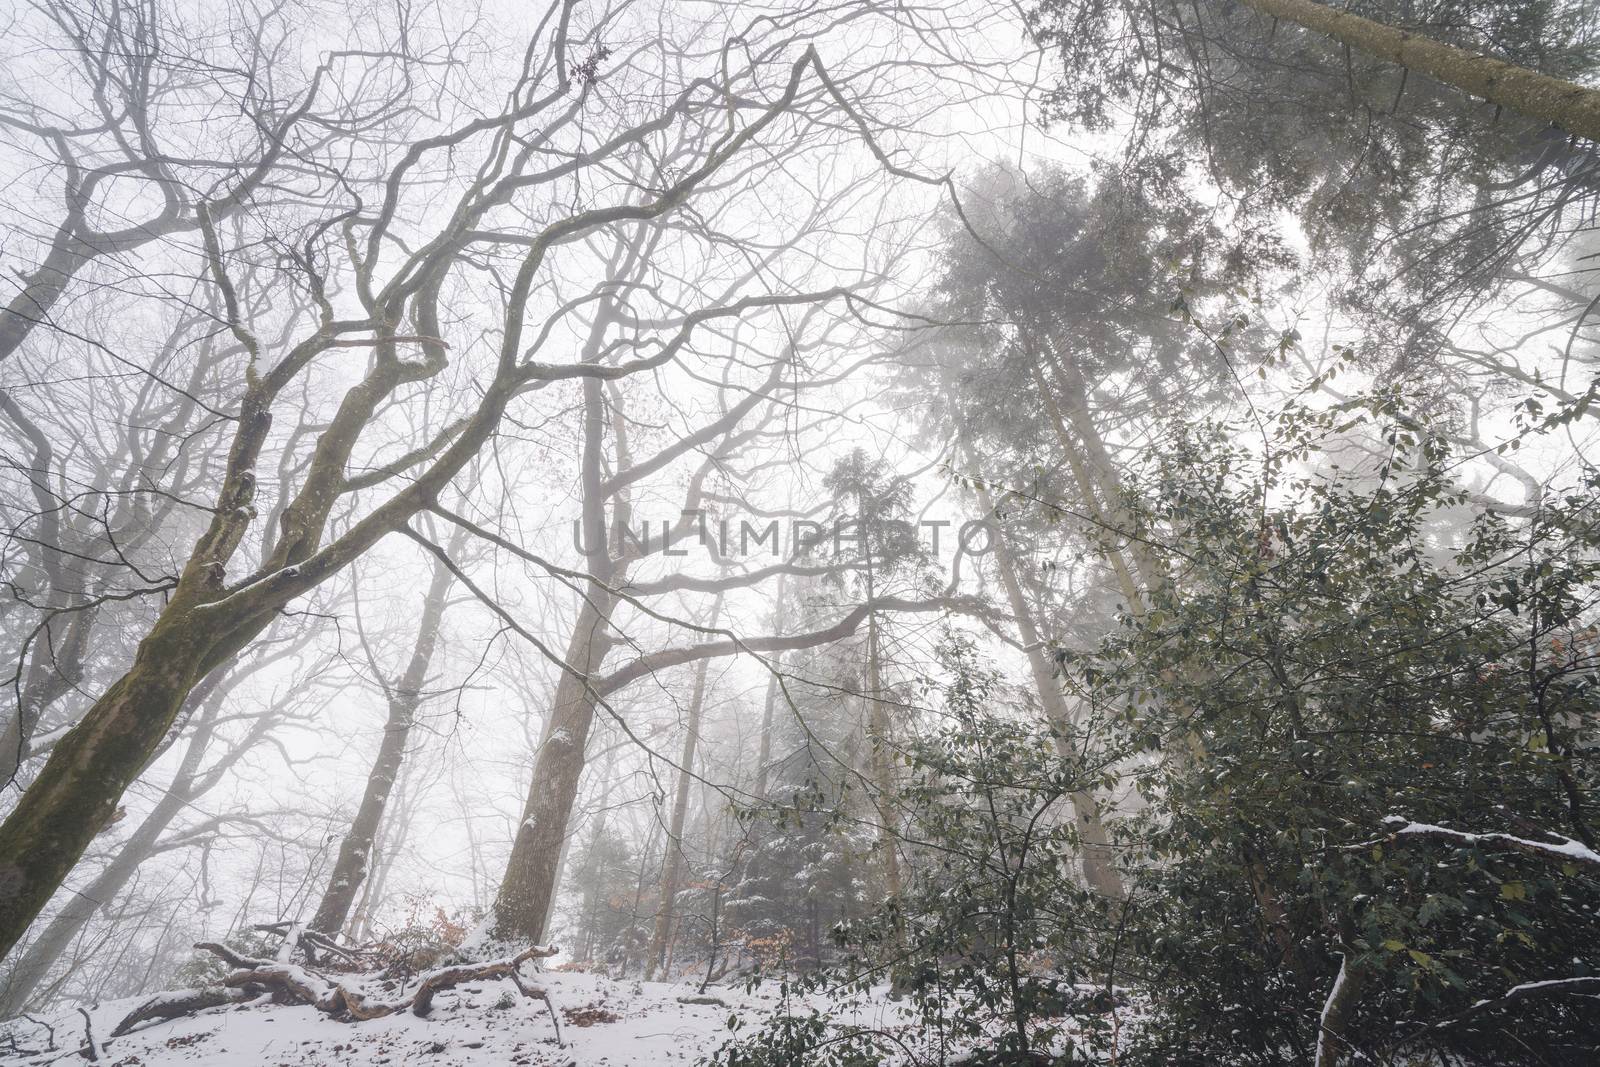 Misty forest in the winter with tall trees and long branches in the fog